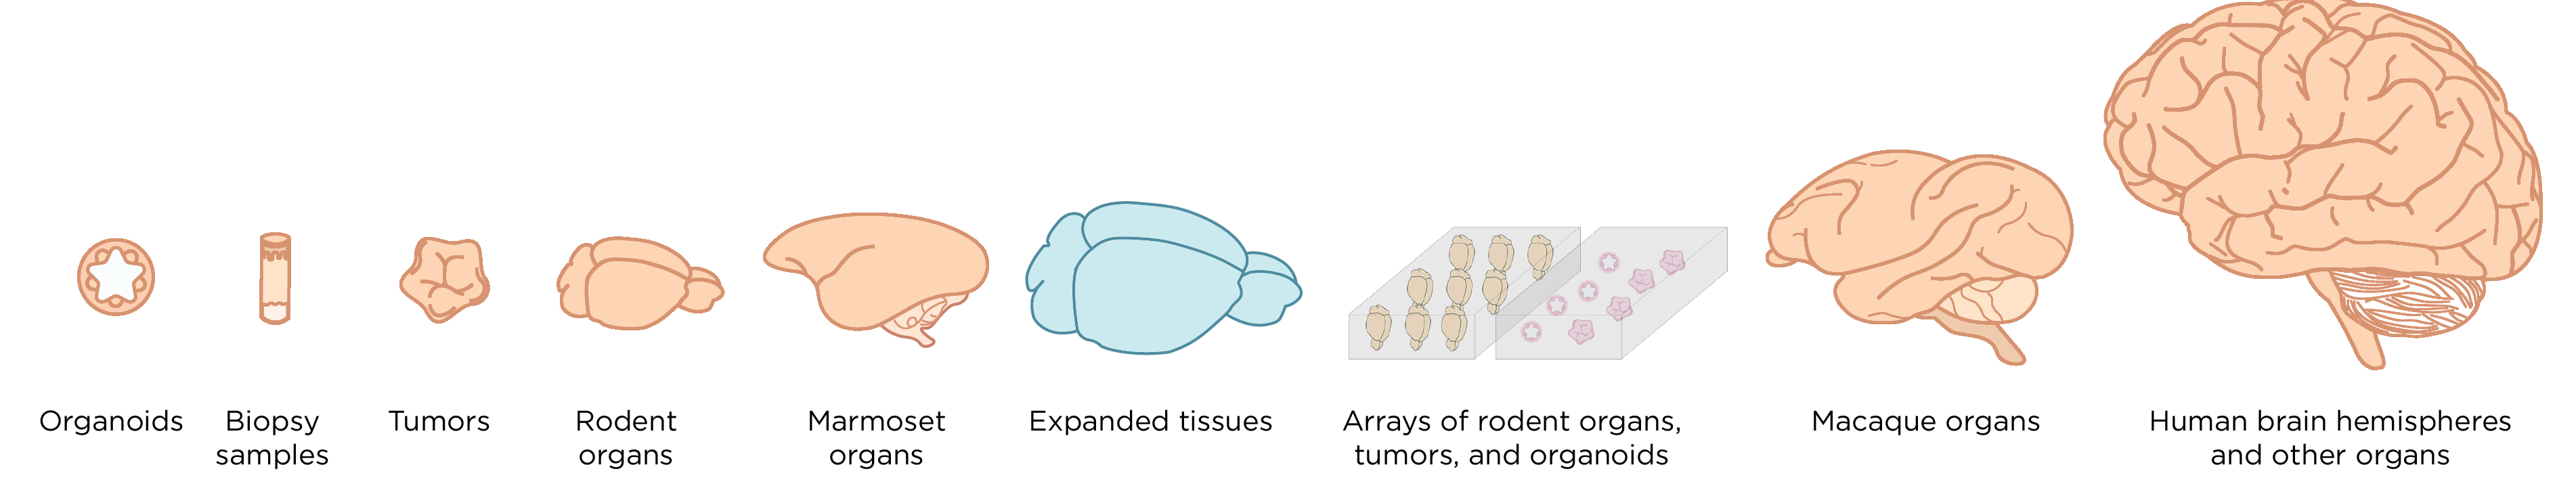 Figure showing Megatome tissue sectioning capabilities for different sample types and sizes